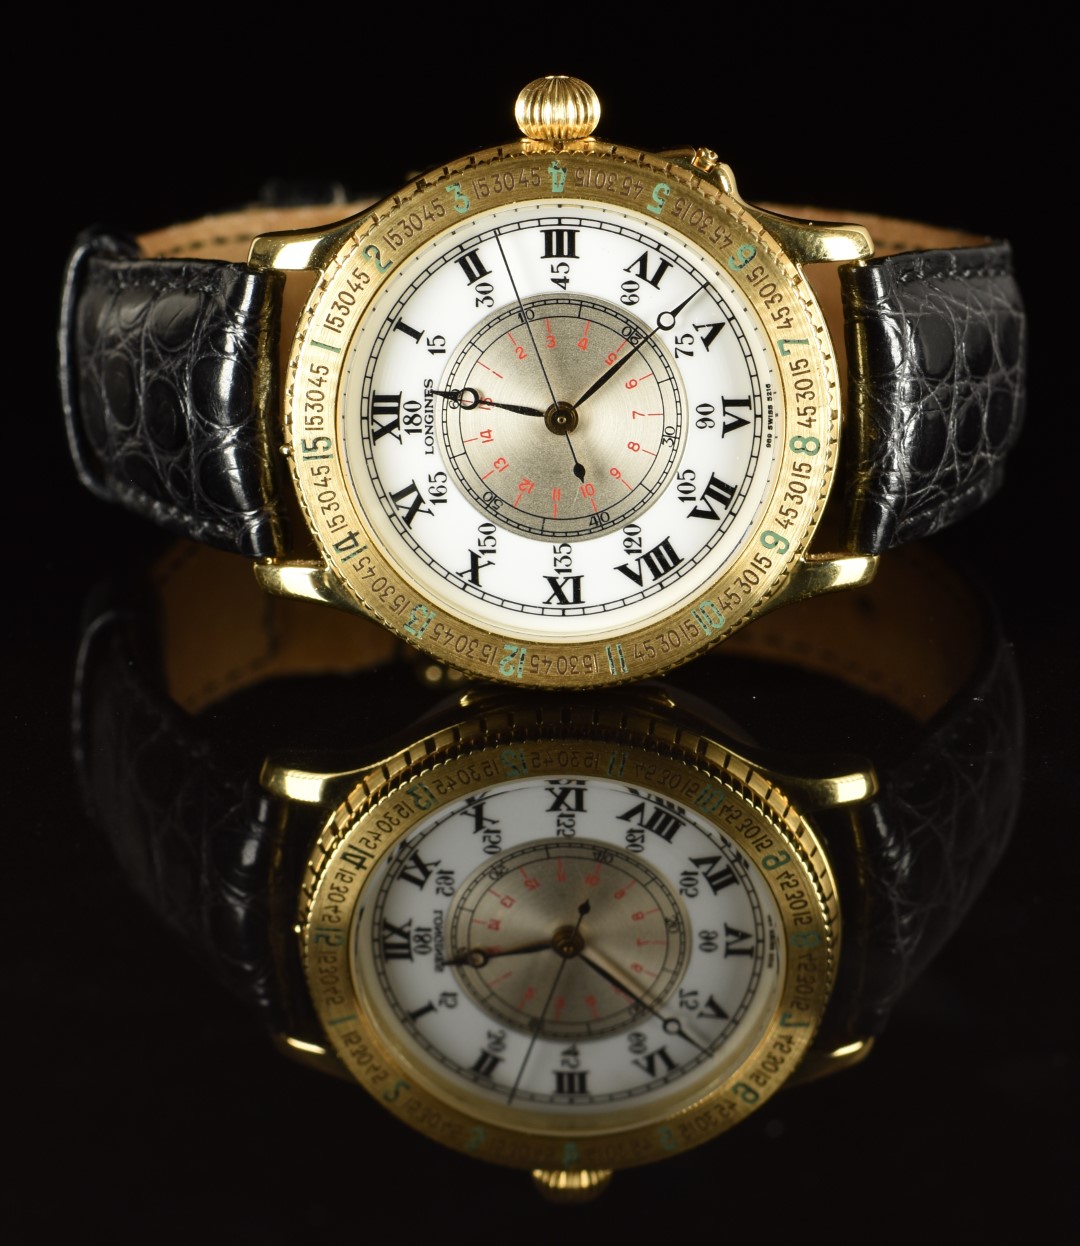 Longines Charles Lindbergh Hour Angle 18ct gold gentleman's automatic wristwatch ref. 989.5216 - Image 2 of 9